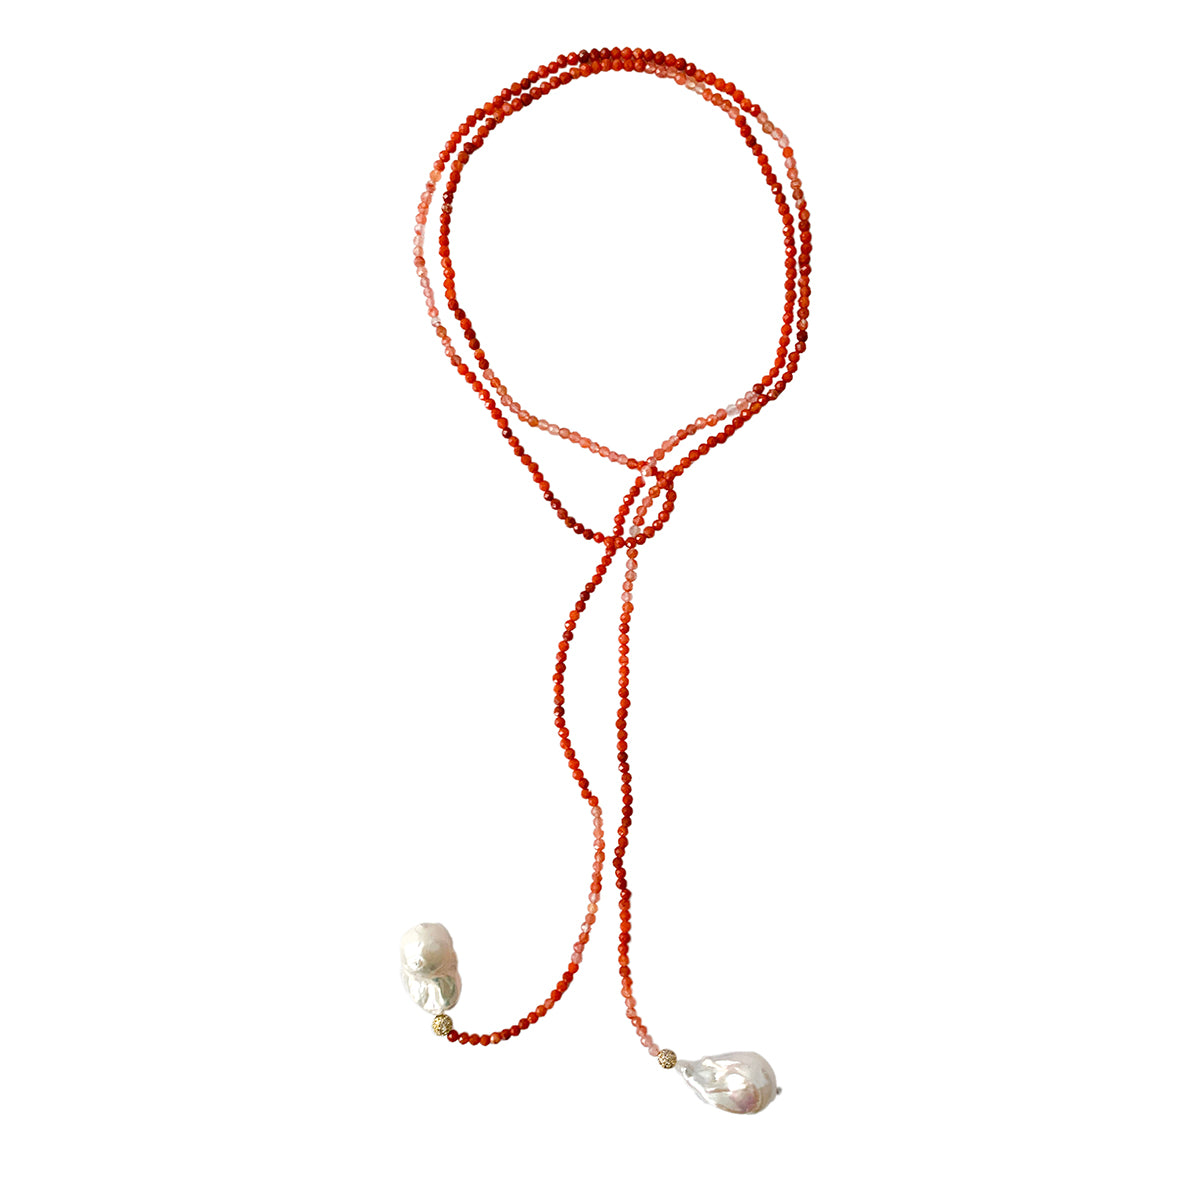 Carnelian Lariat with Baroque Pearls